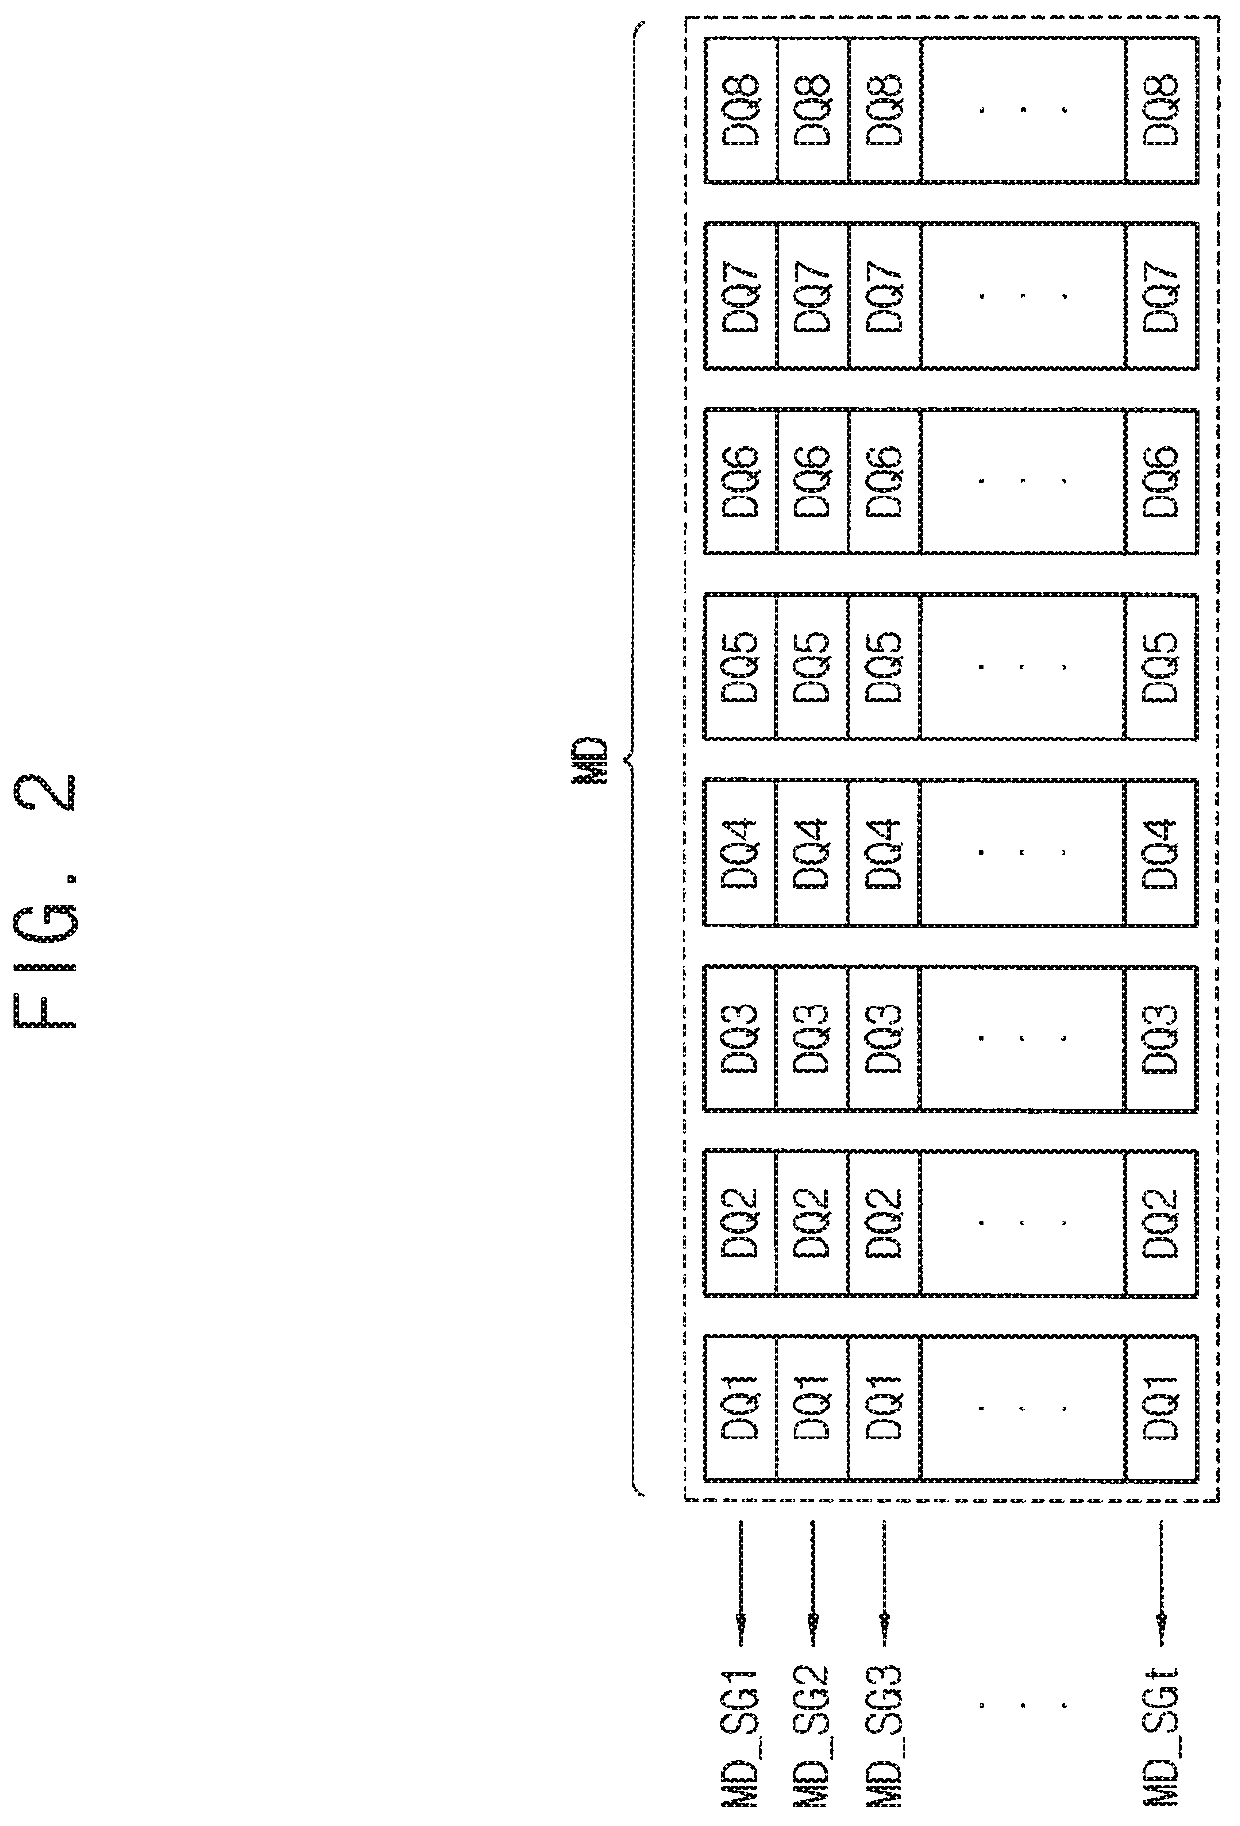 Semiconductor memory devices having enhanced error correction circuits therein